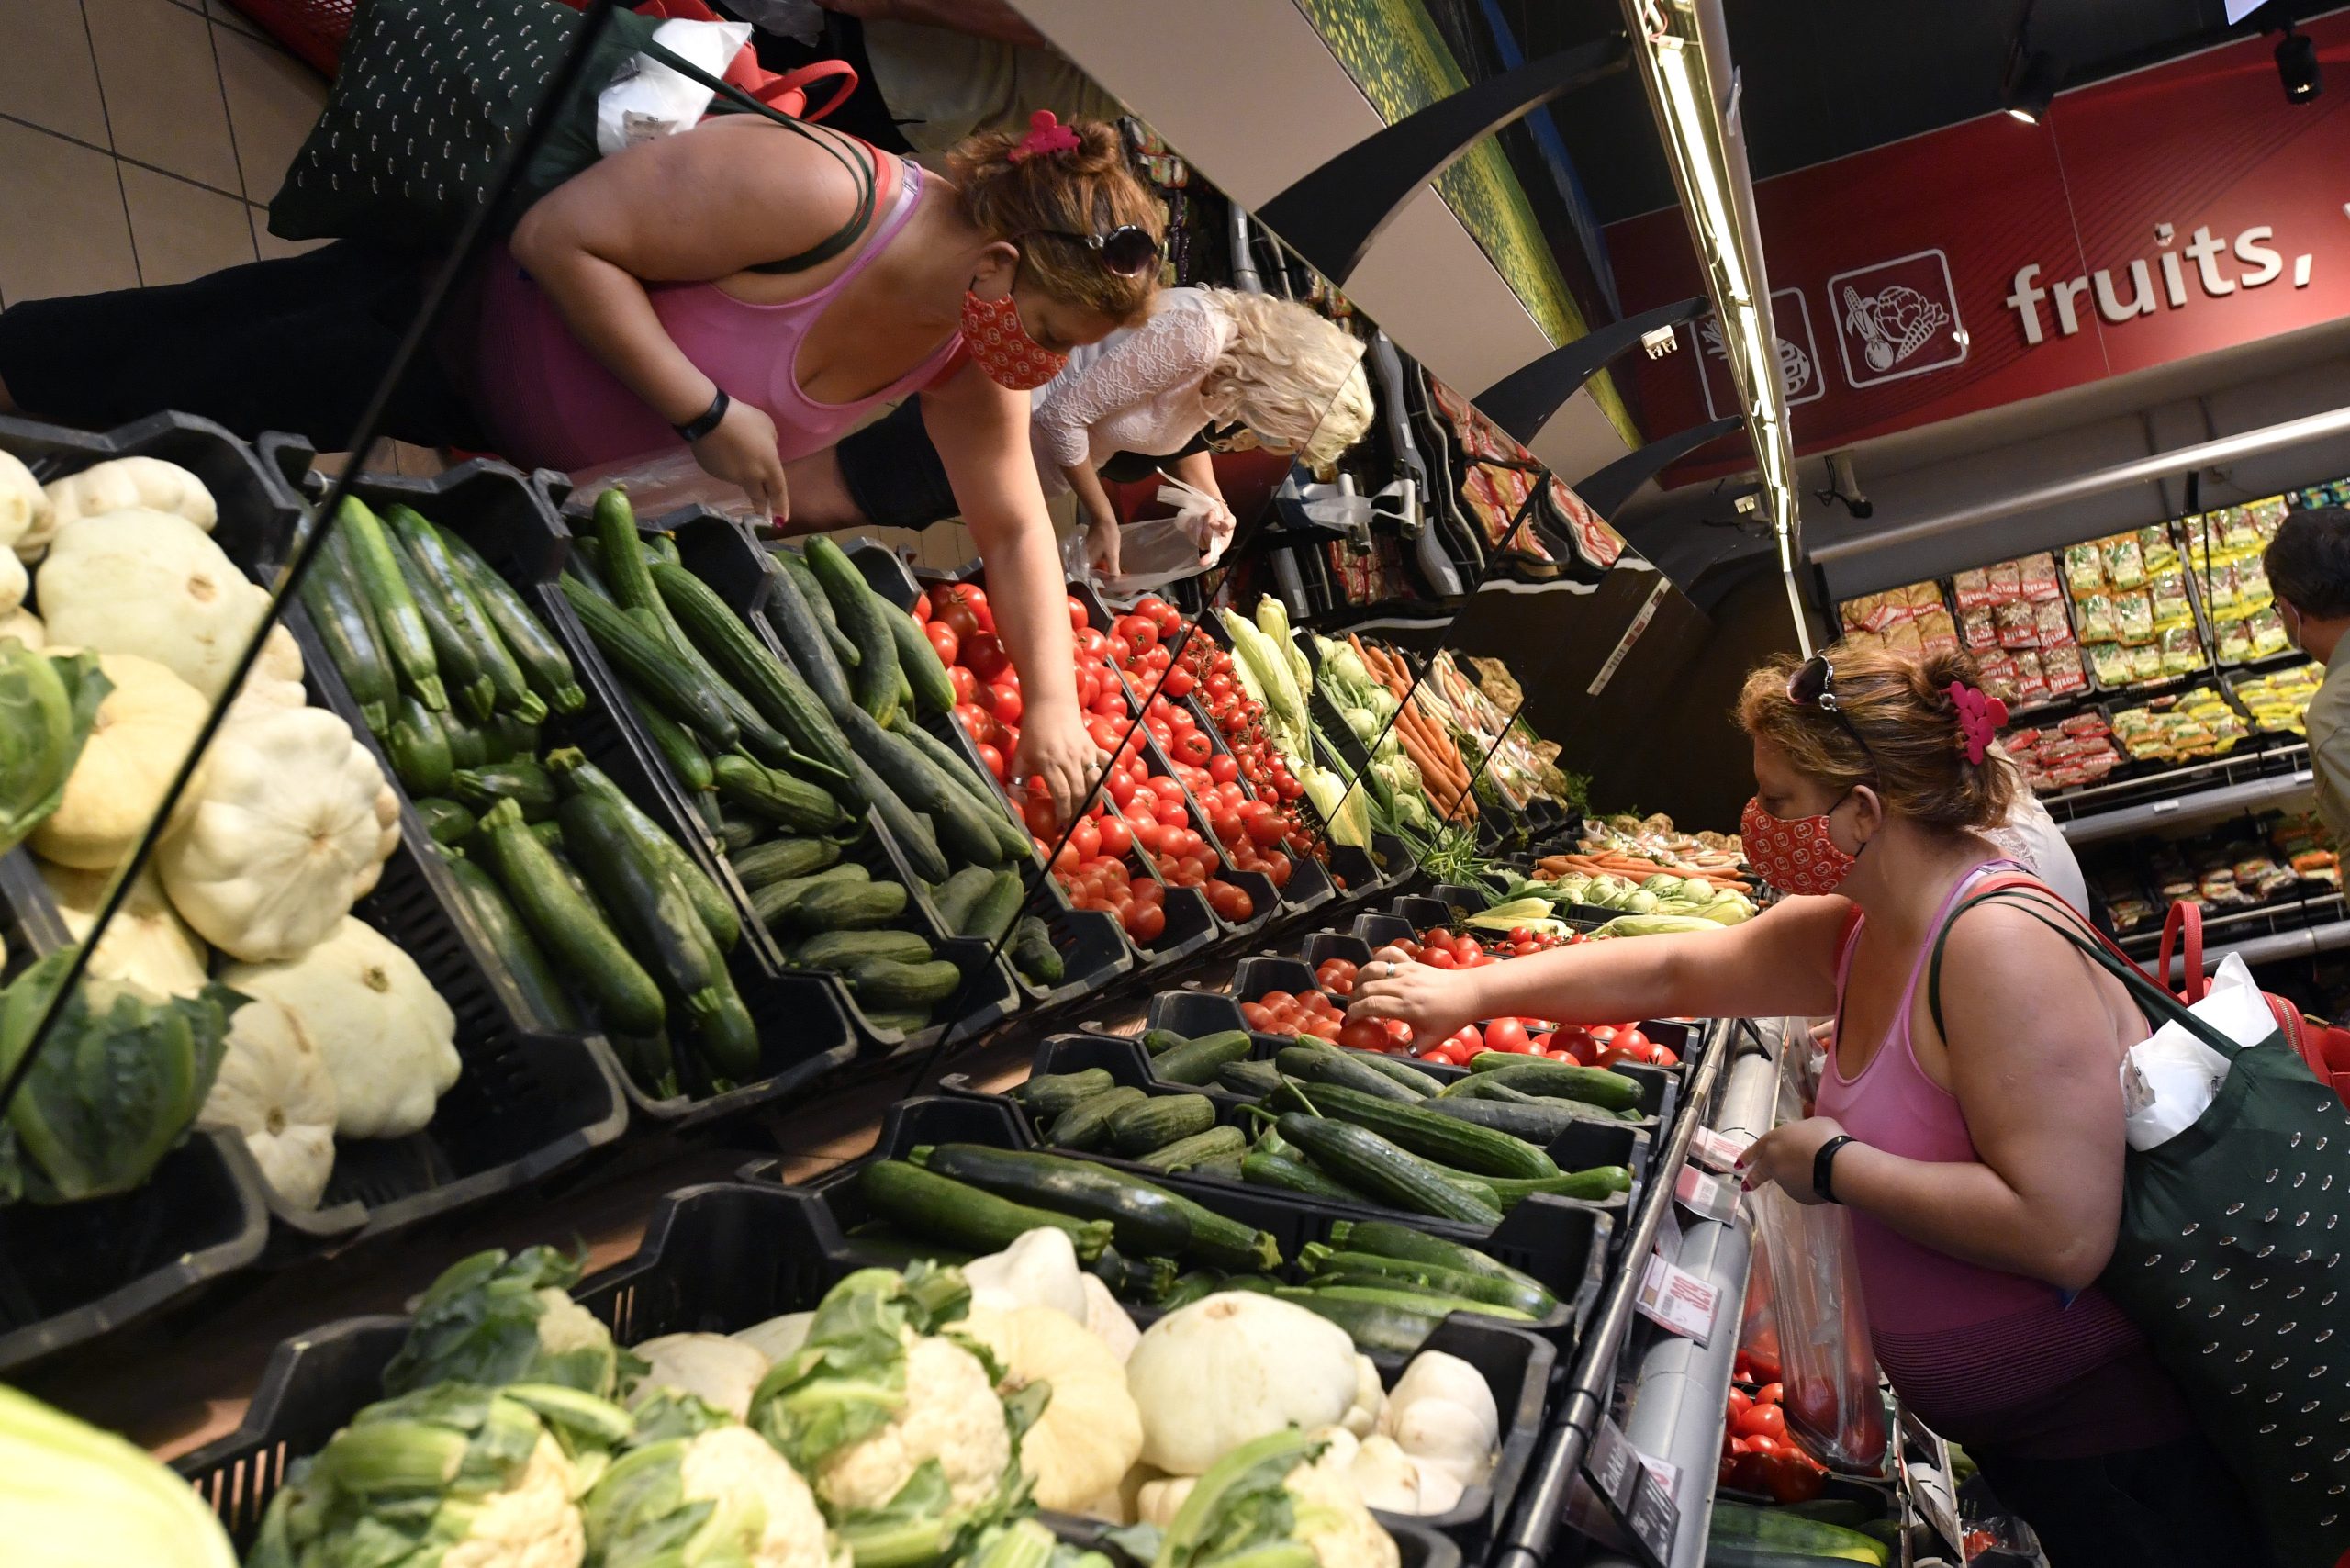 Headline Inflation 3.9% in August, Food Prices Increase by 7.9%